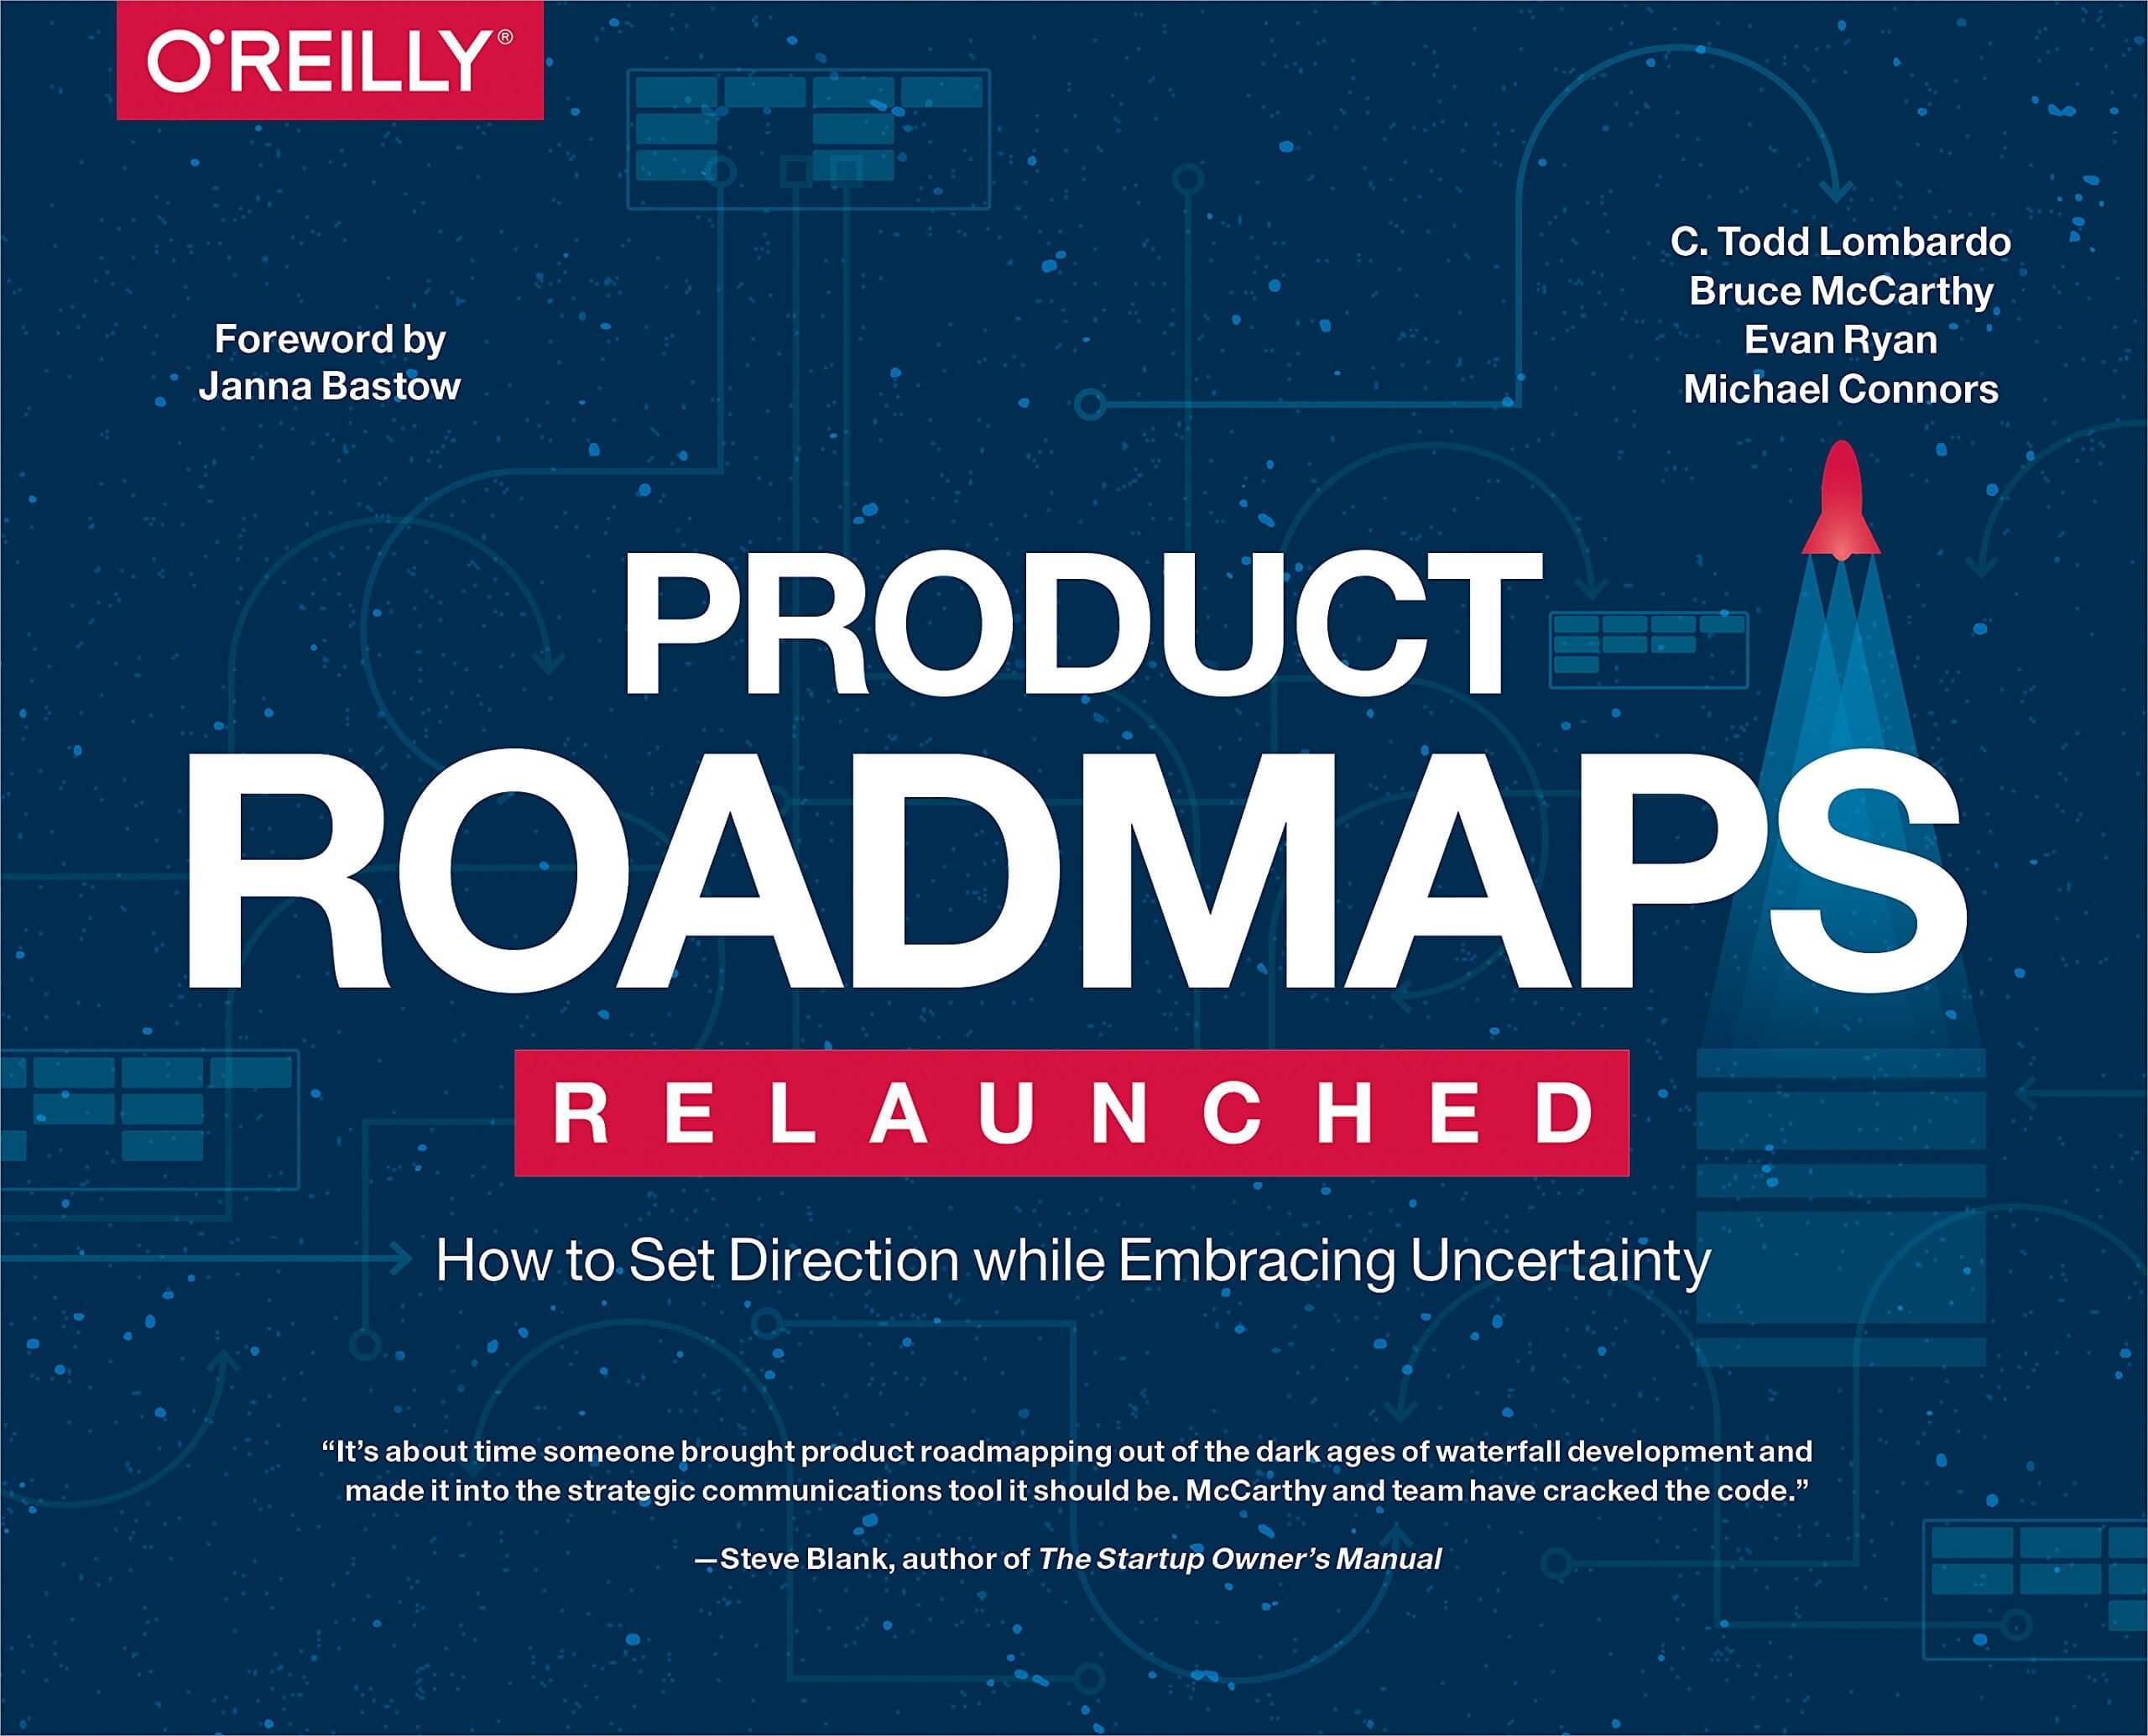 Product roadmaps relaunched book cover